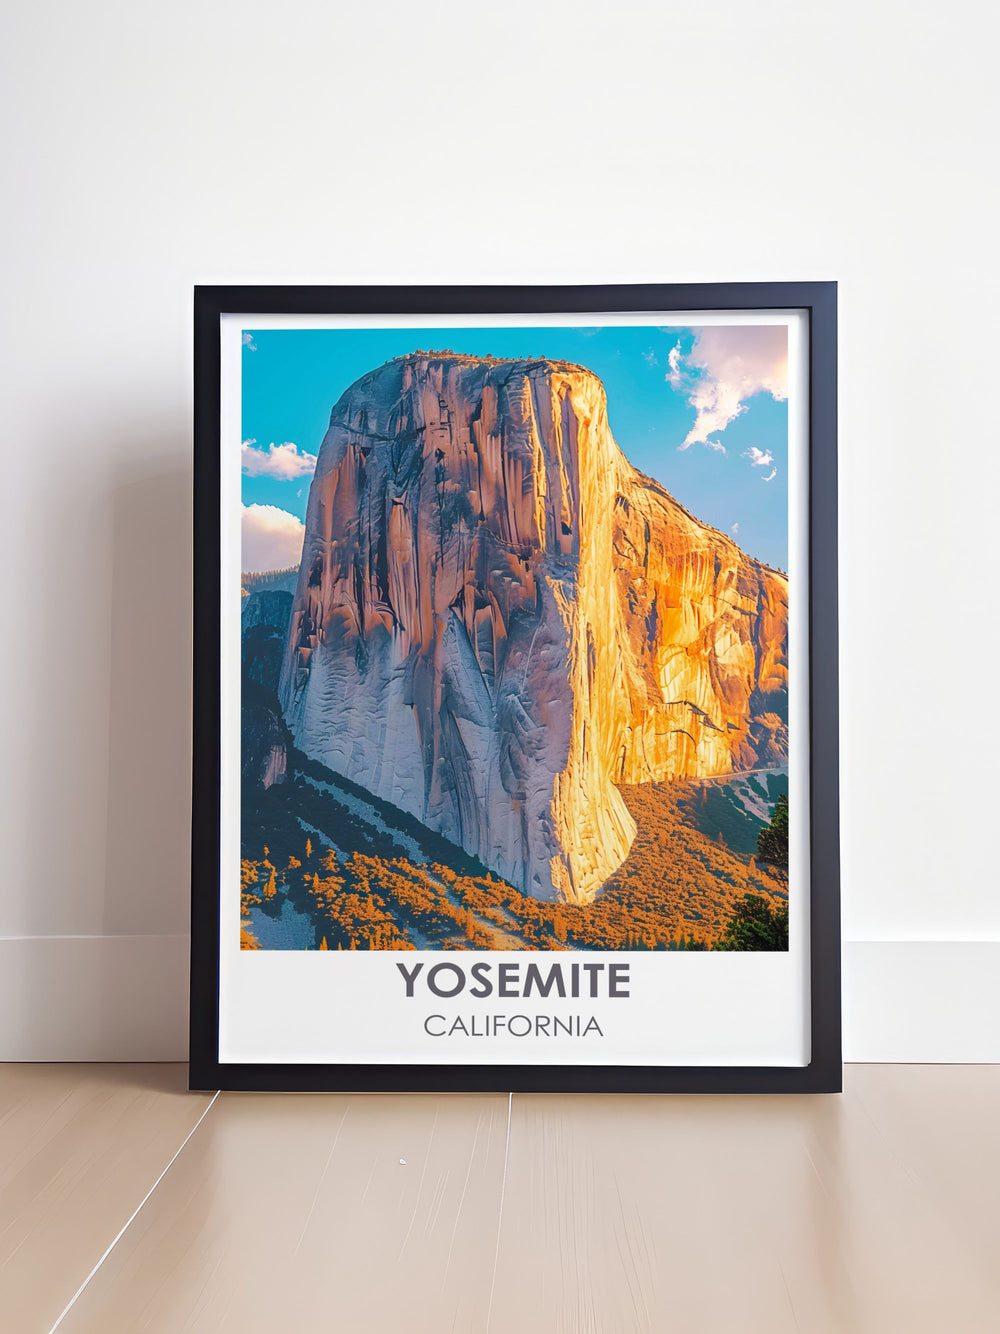 The artwork features Yosemites Half Dome, showcasing its unique shape and challenging hiking trails, perfect for adventurers and nature lovers who appreciate the beauty of this famous granite peak.